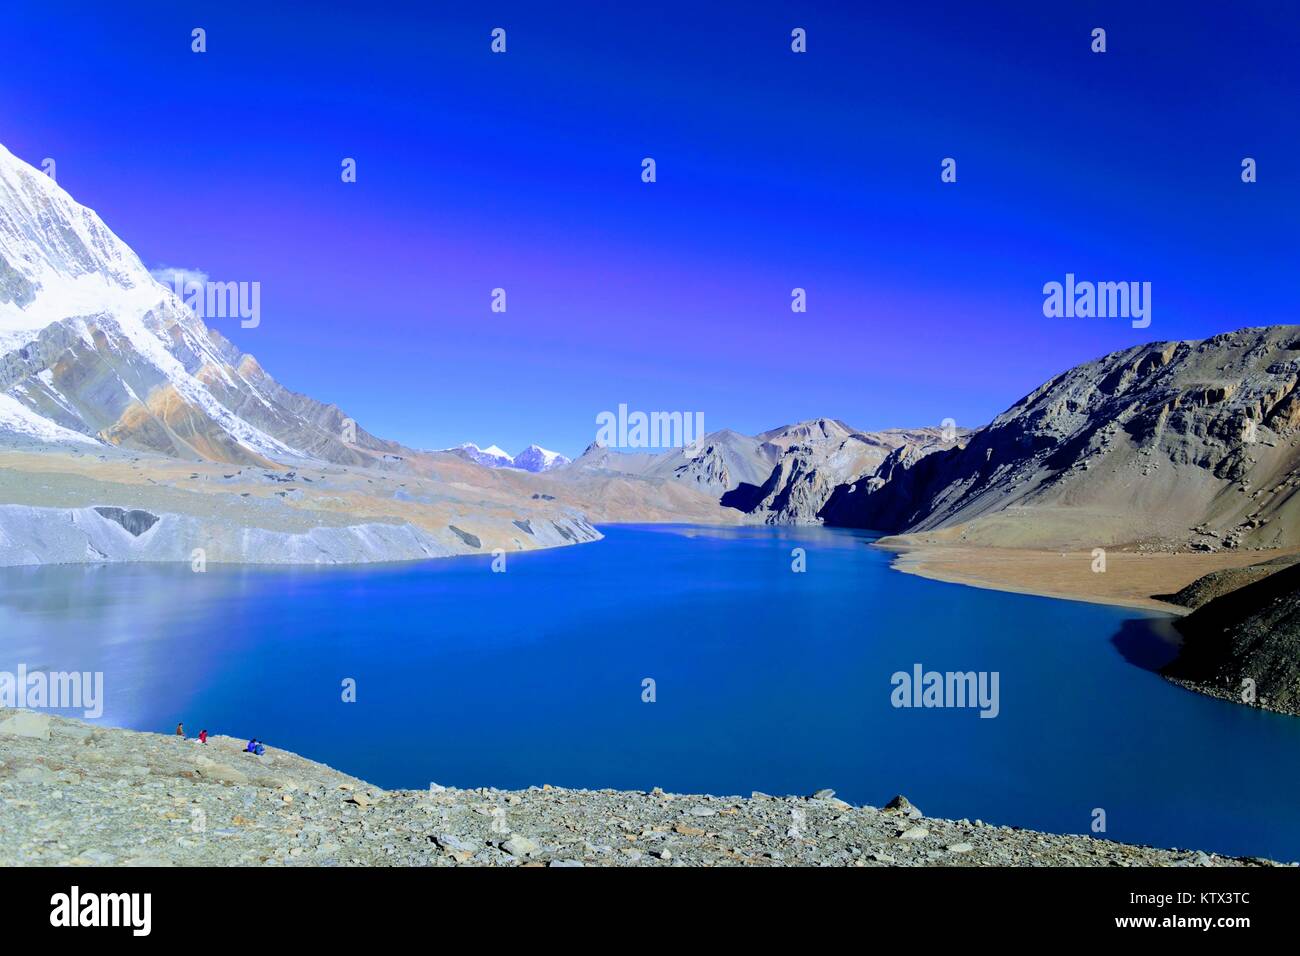 Beautiful Tilicho lake located in Nepal. It is the world's highest lake. Stock Photo